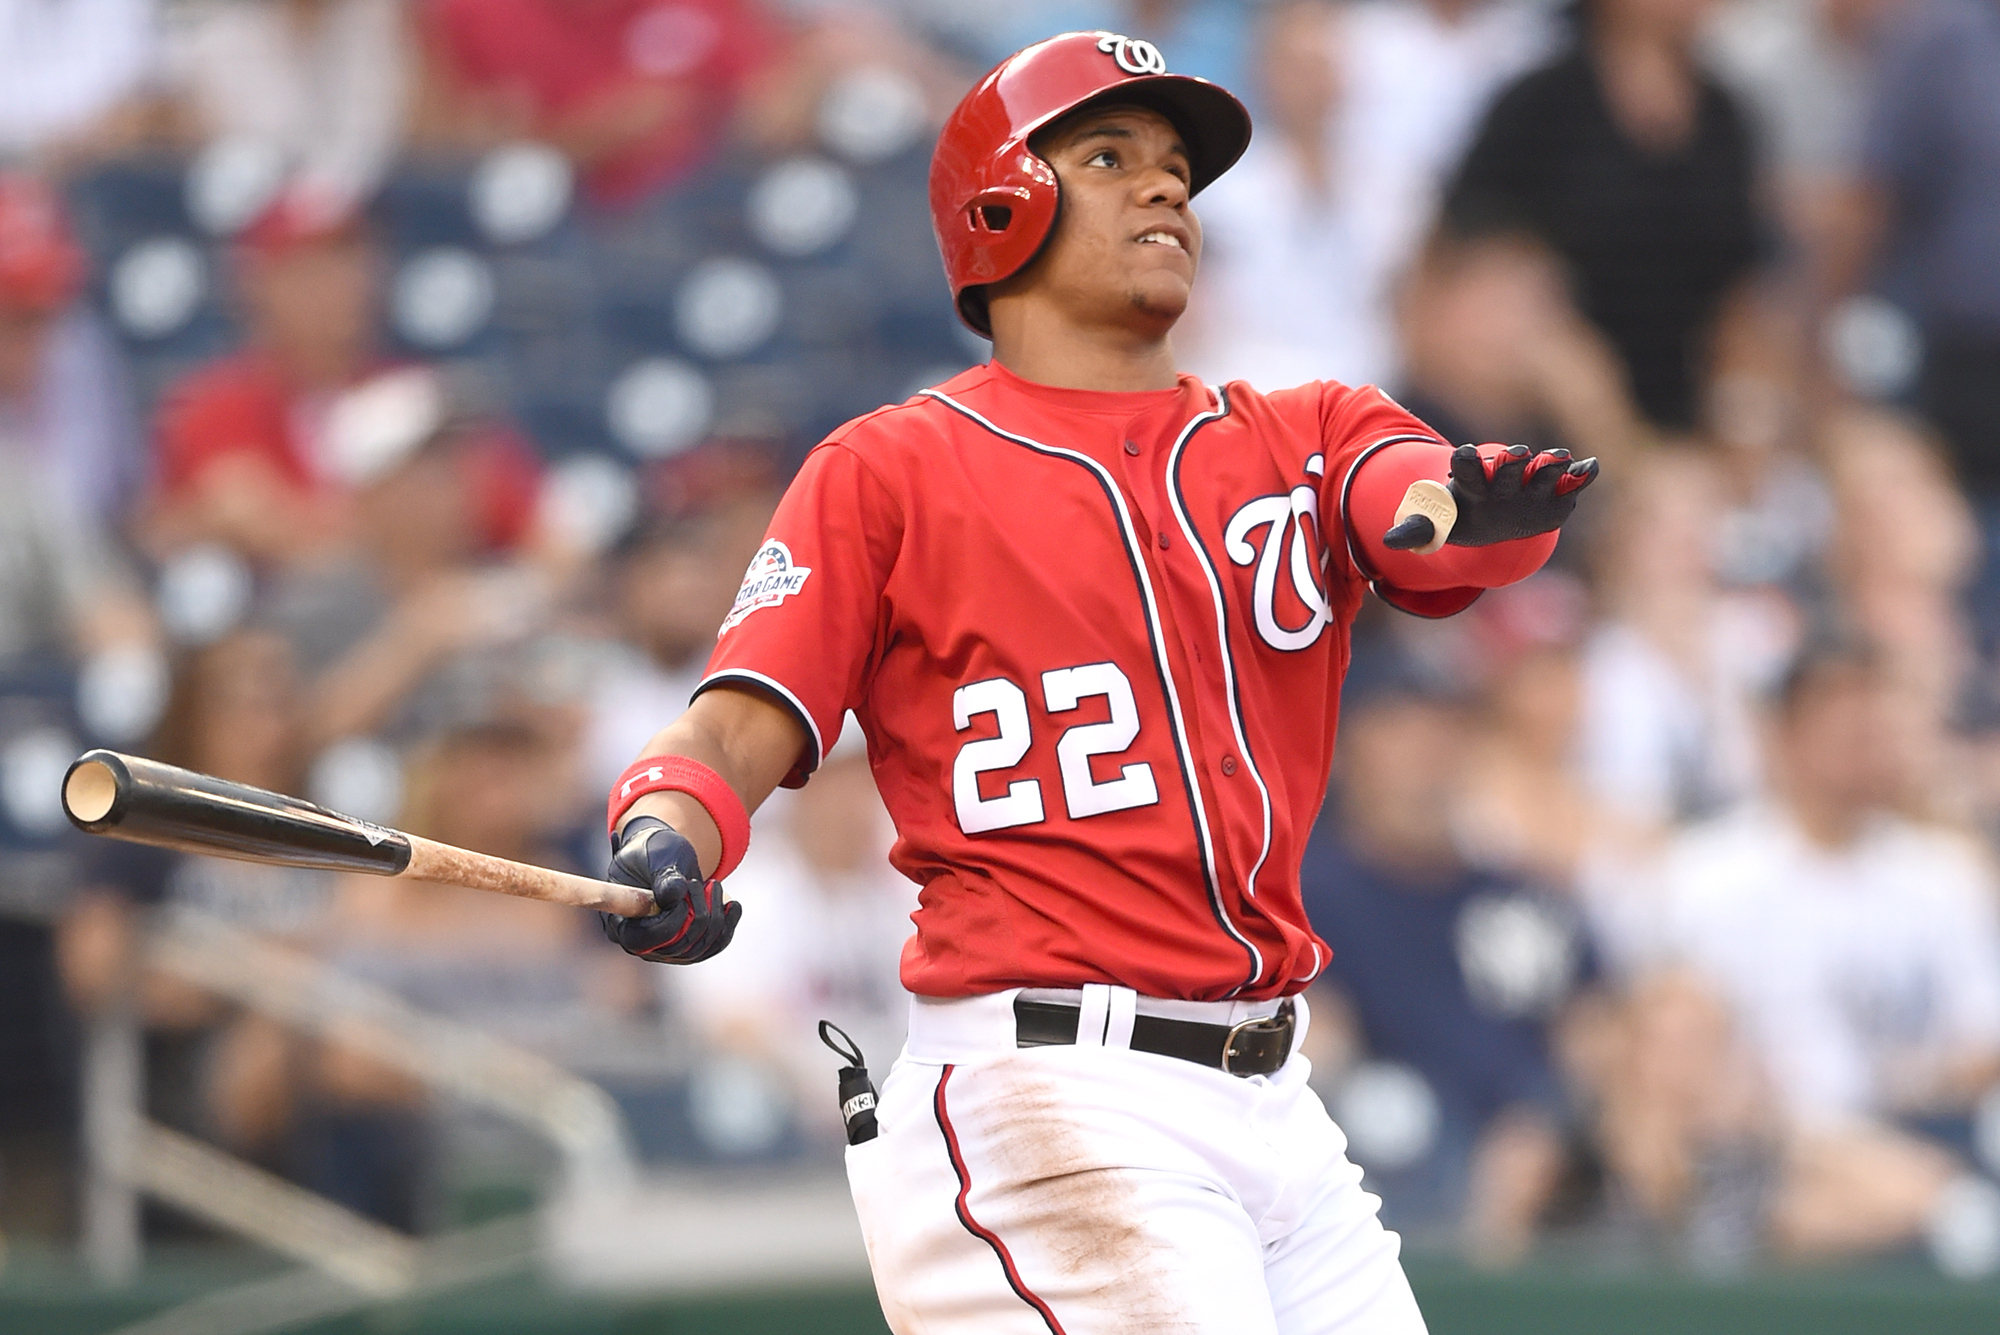 Juan Soto homers twice to lift Washington Nationals to 5-4 win over the  Yankees and series split in New York - Federal Baseball